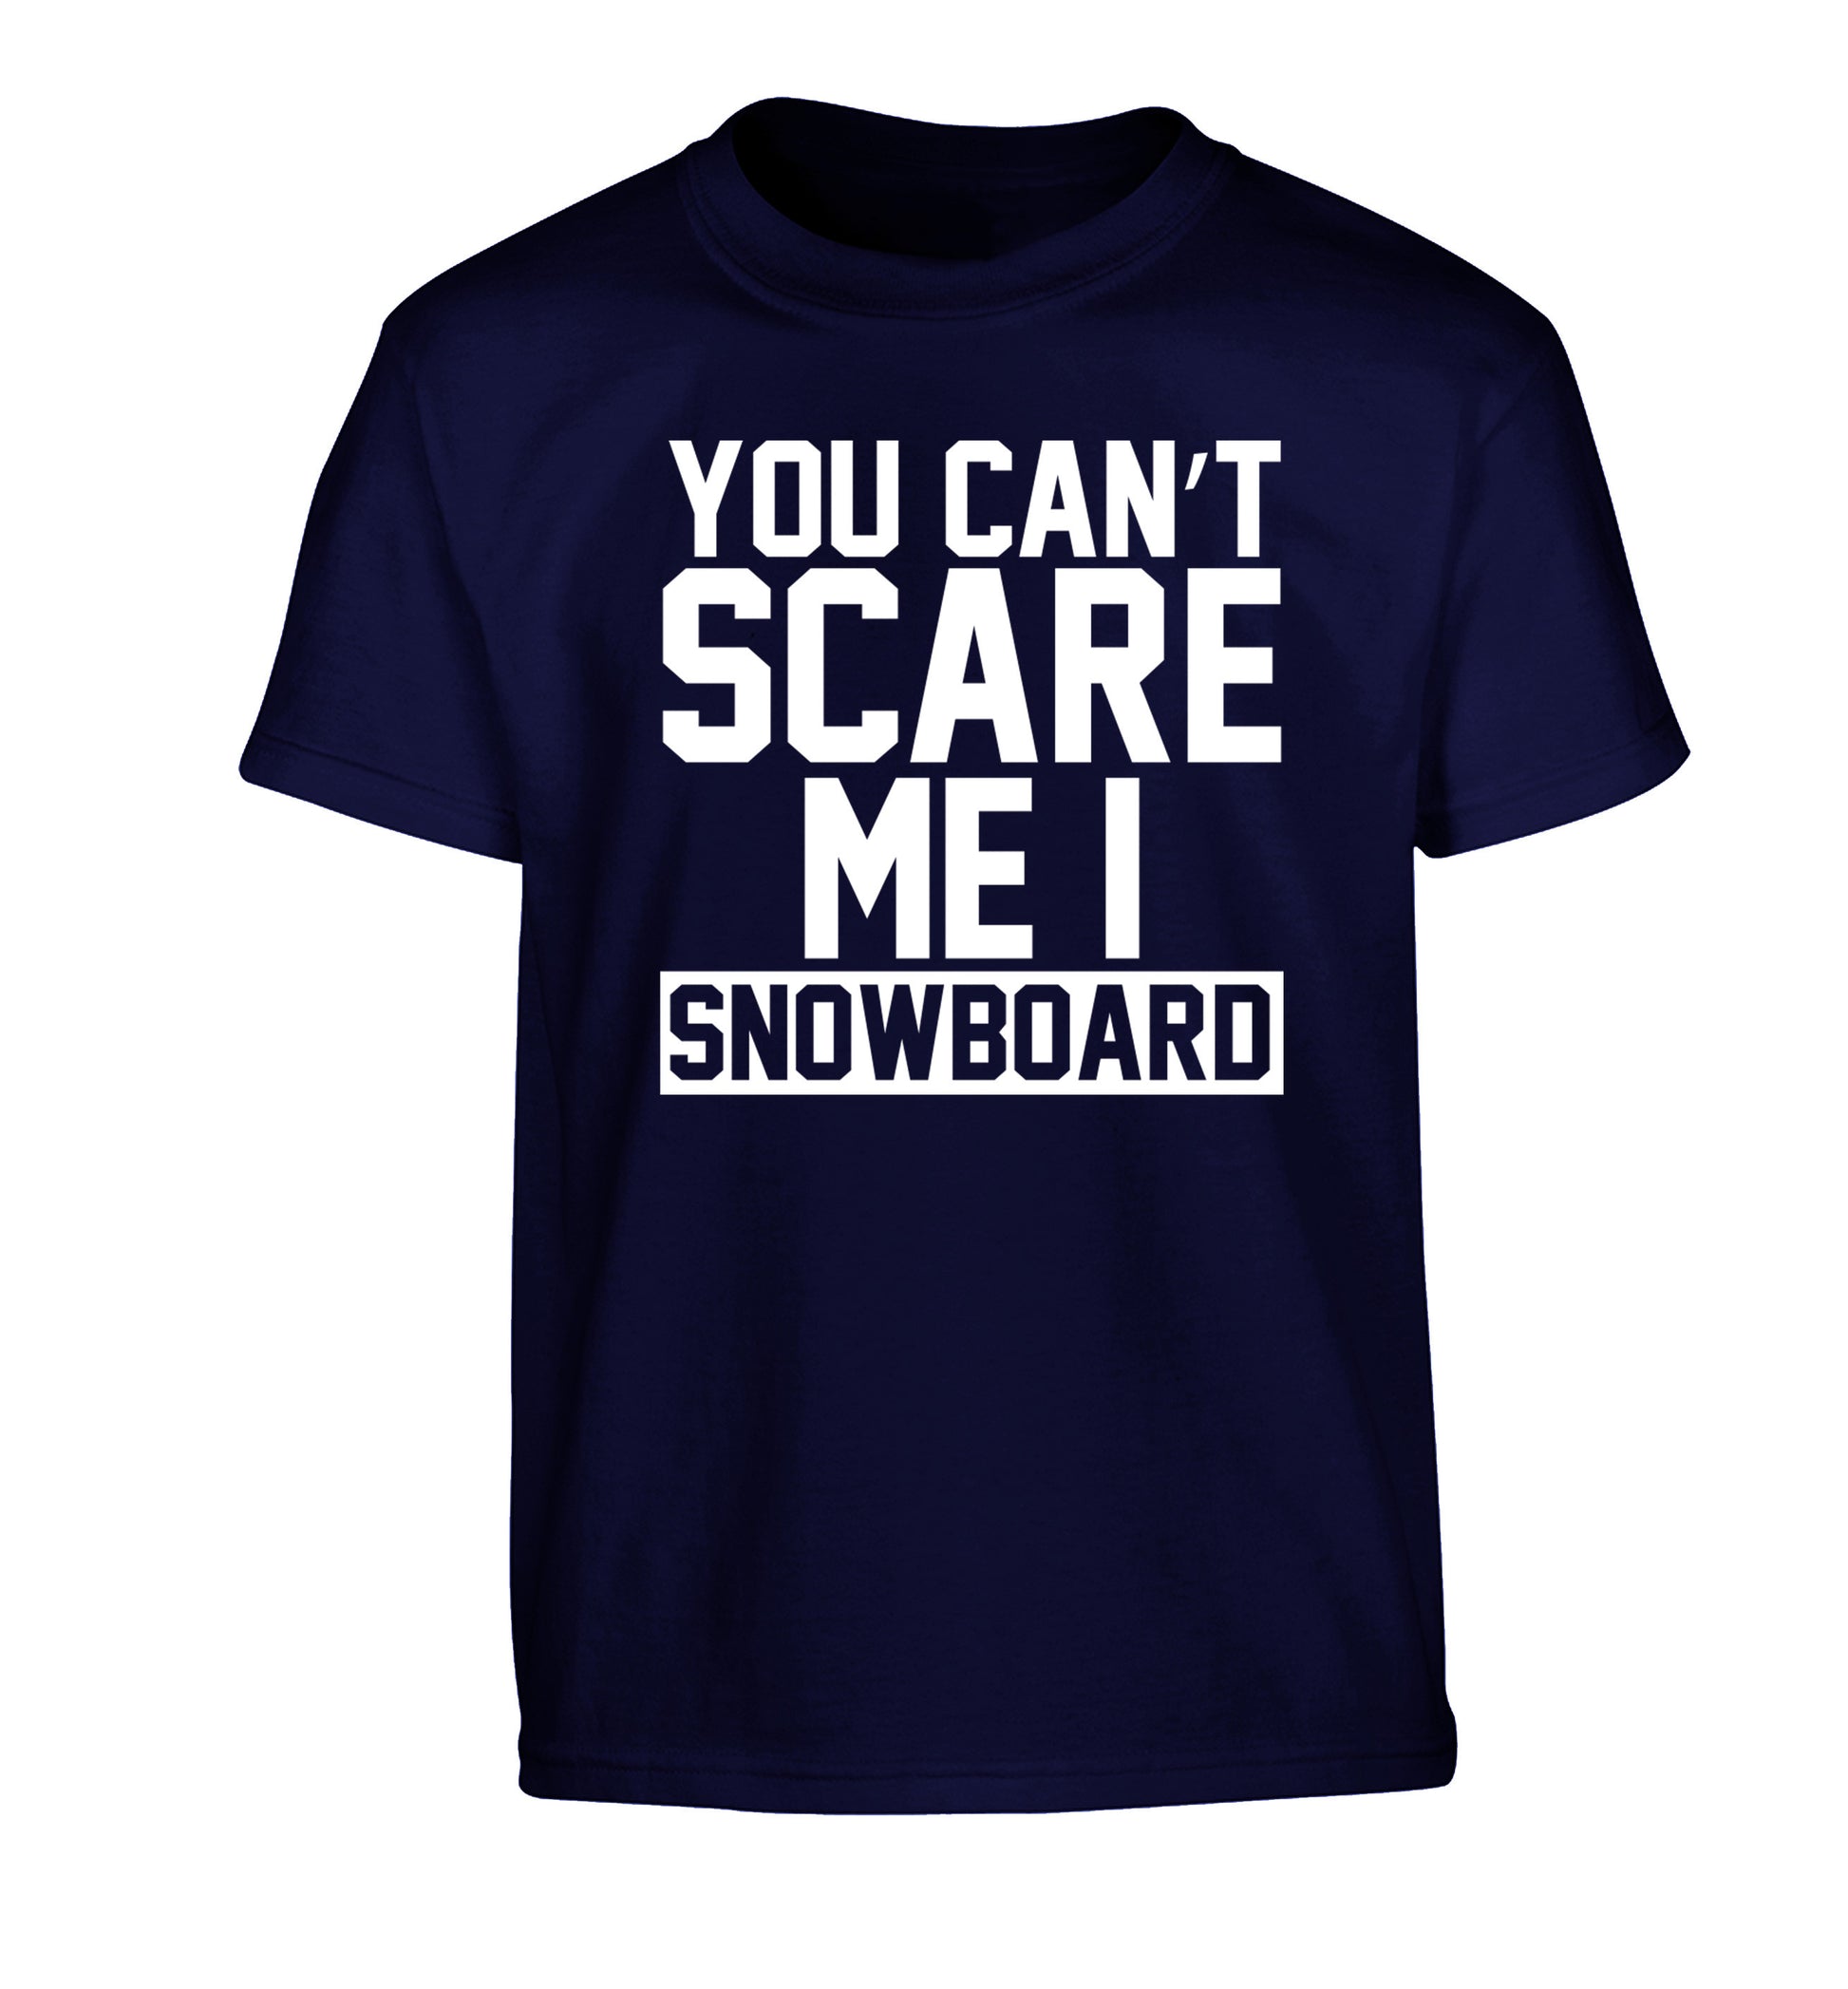 You can't scare me I snowboard Children's navy Tshirt 12-14 Years